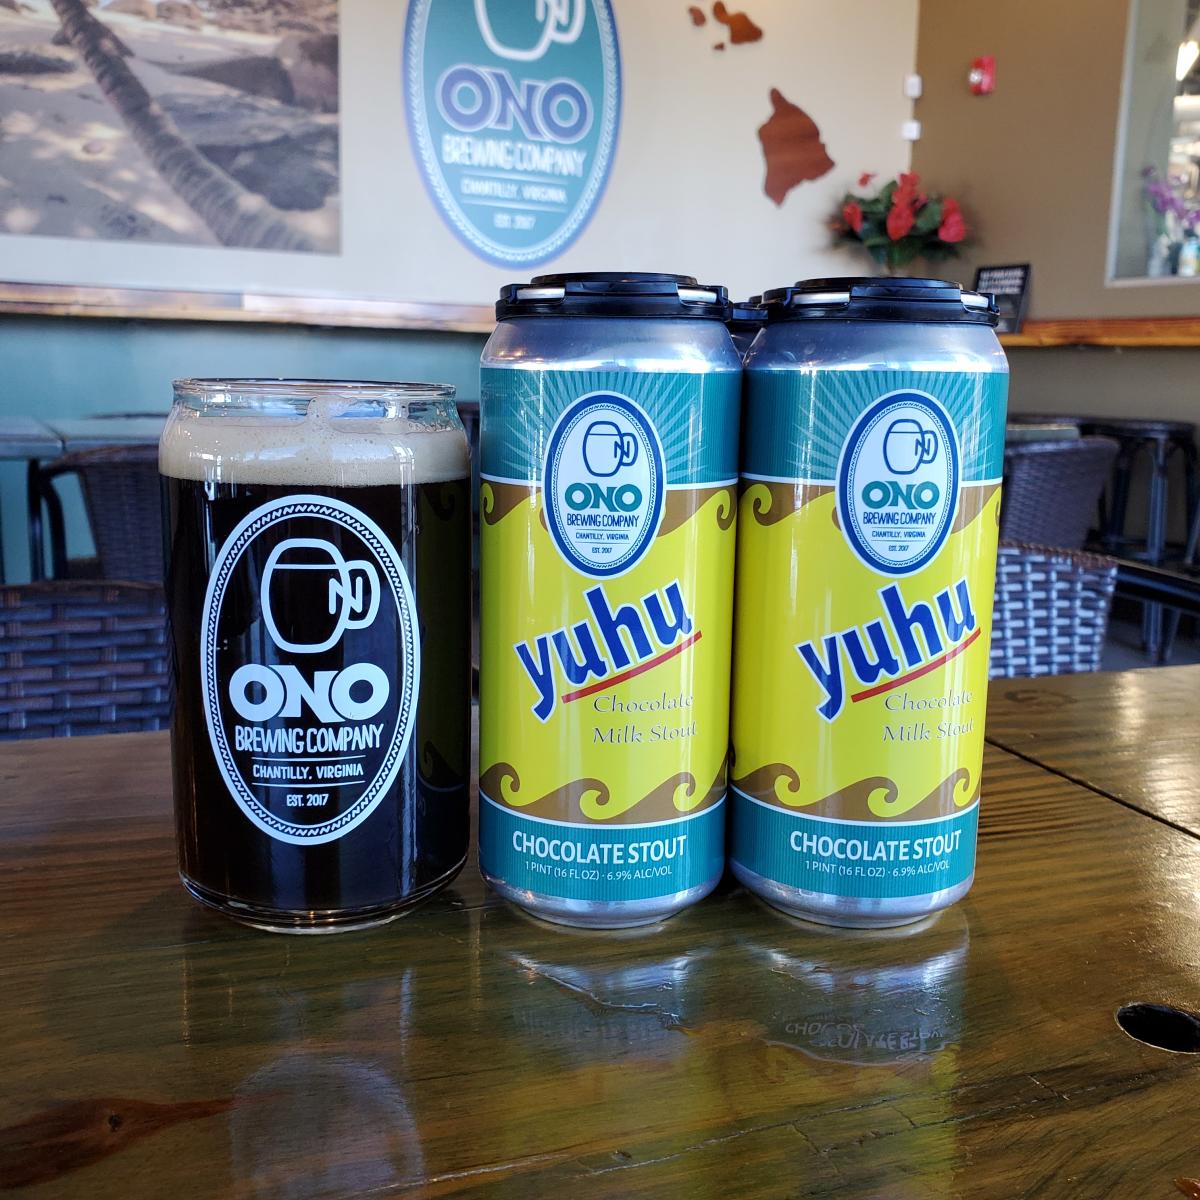 A full pint of chocolate milk stout beer sits next to two cans of the same beer at Ono Brewing Company in Chantilly